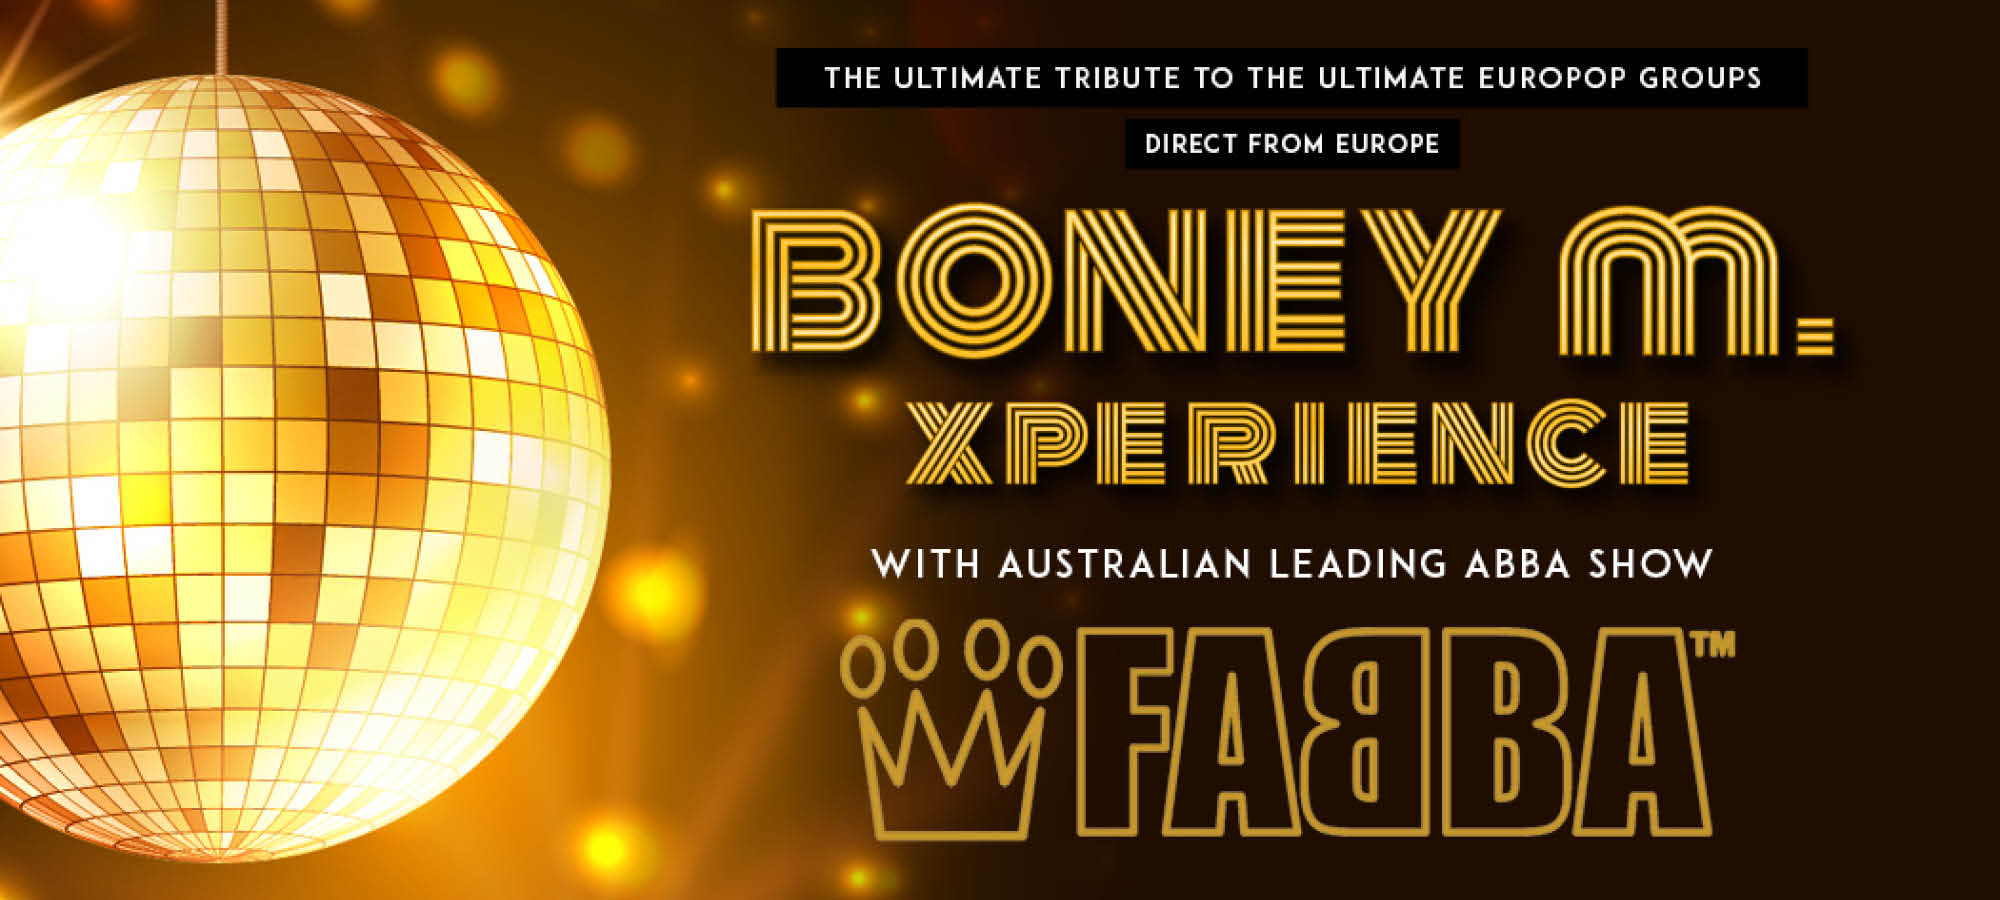 The Boney M Xperience & Fabba Ultimate Tribute to the Europop Groups